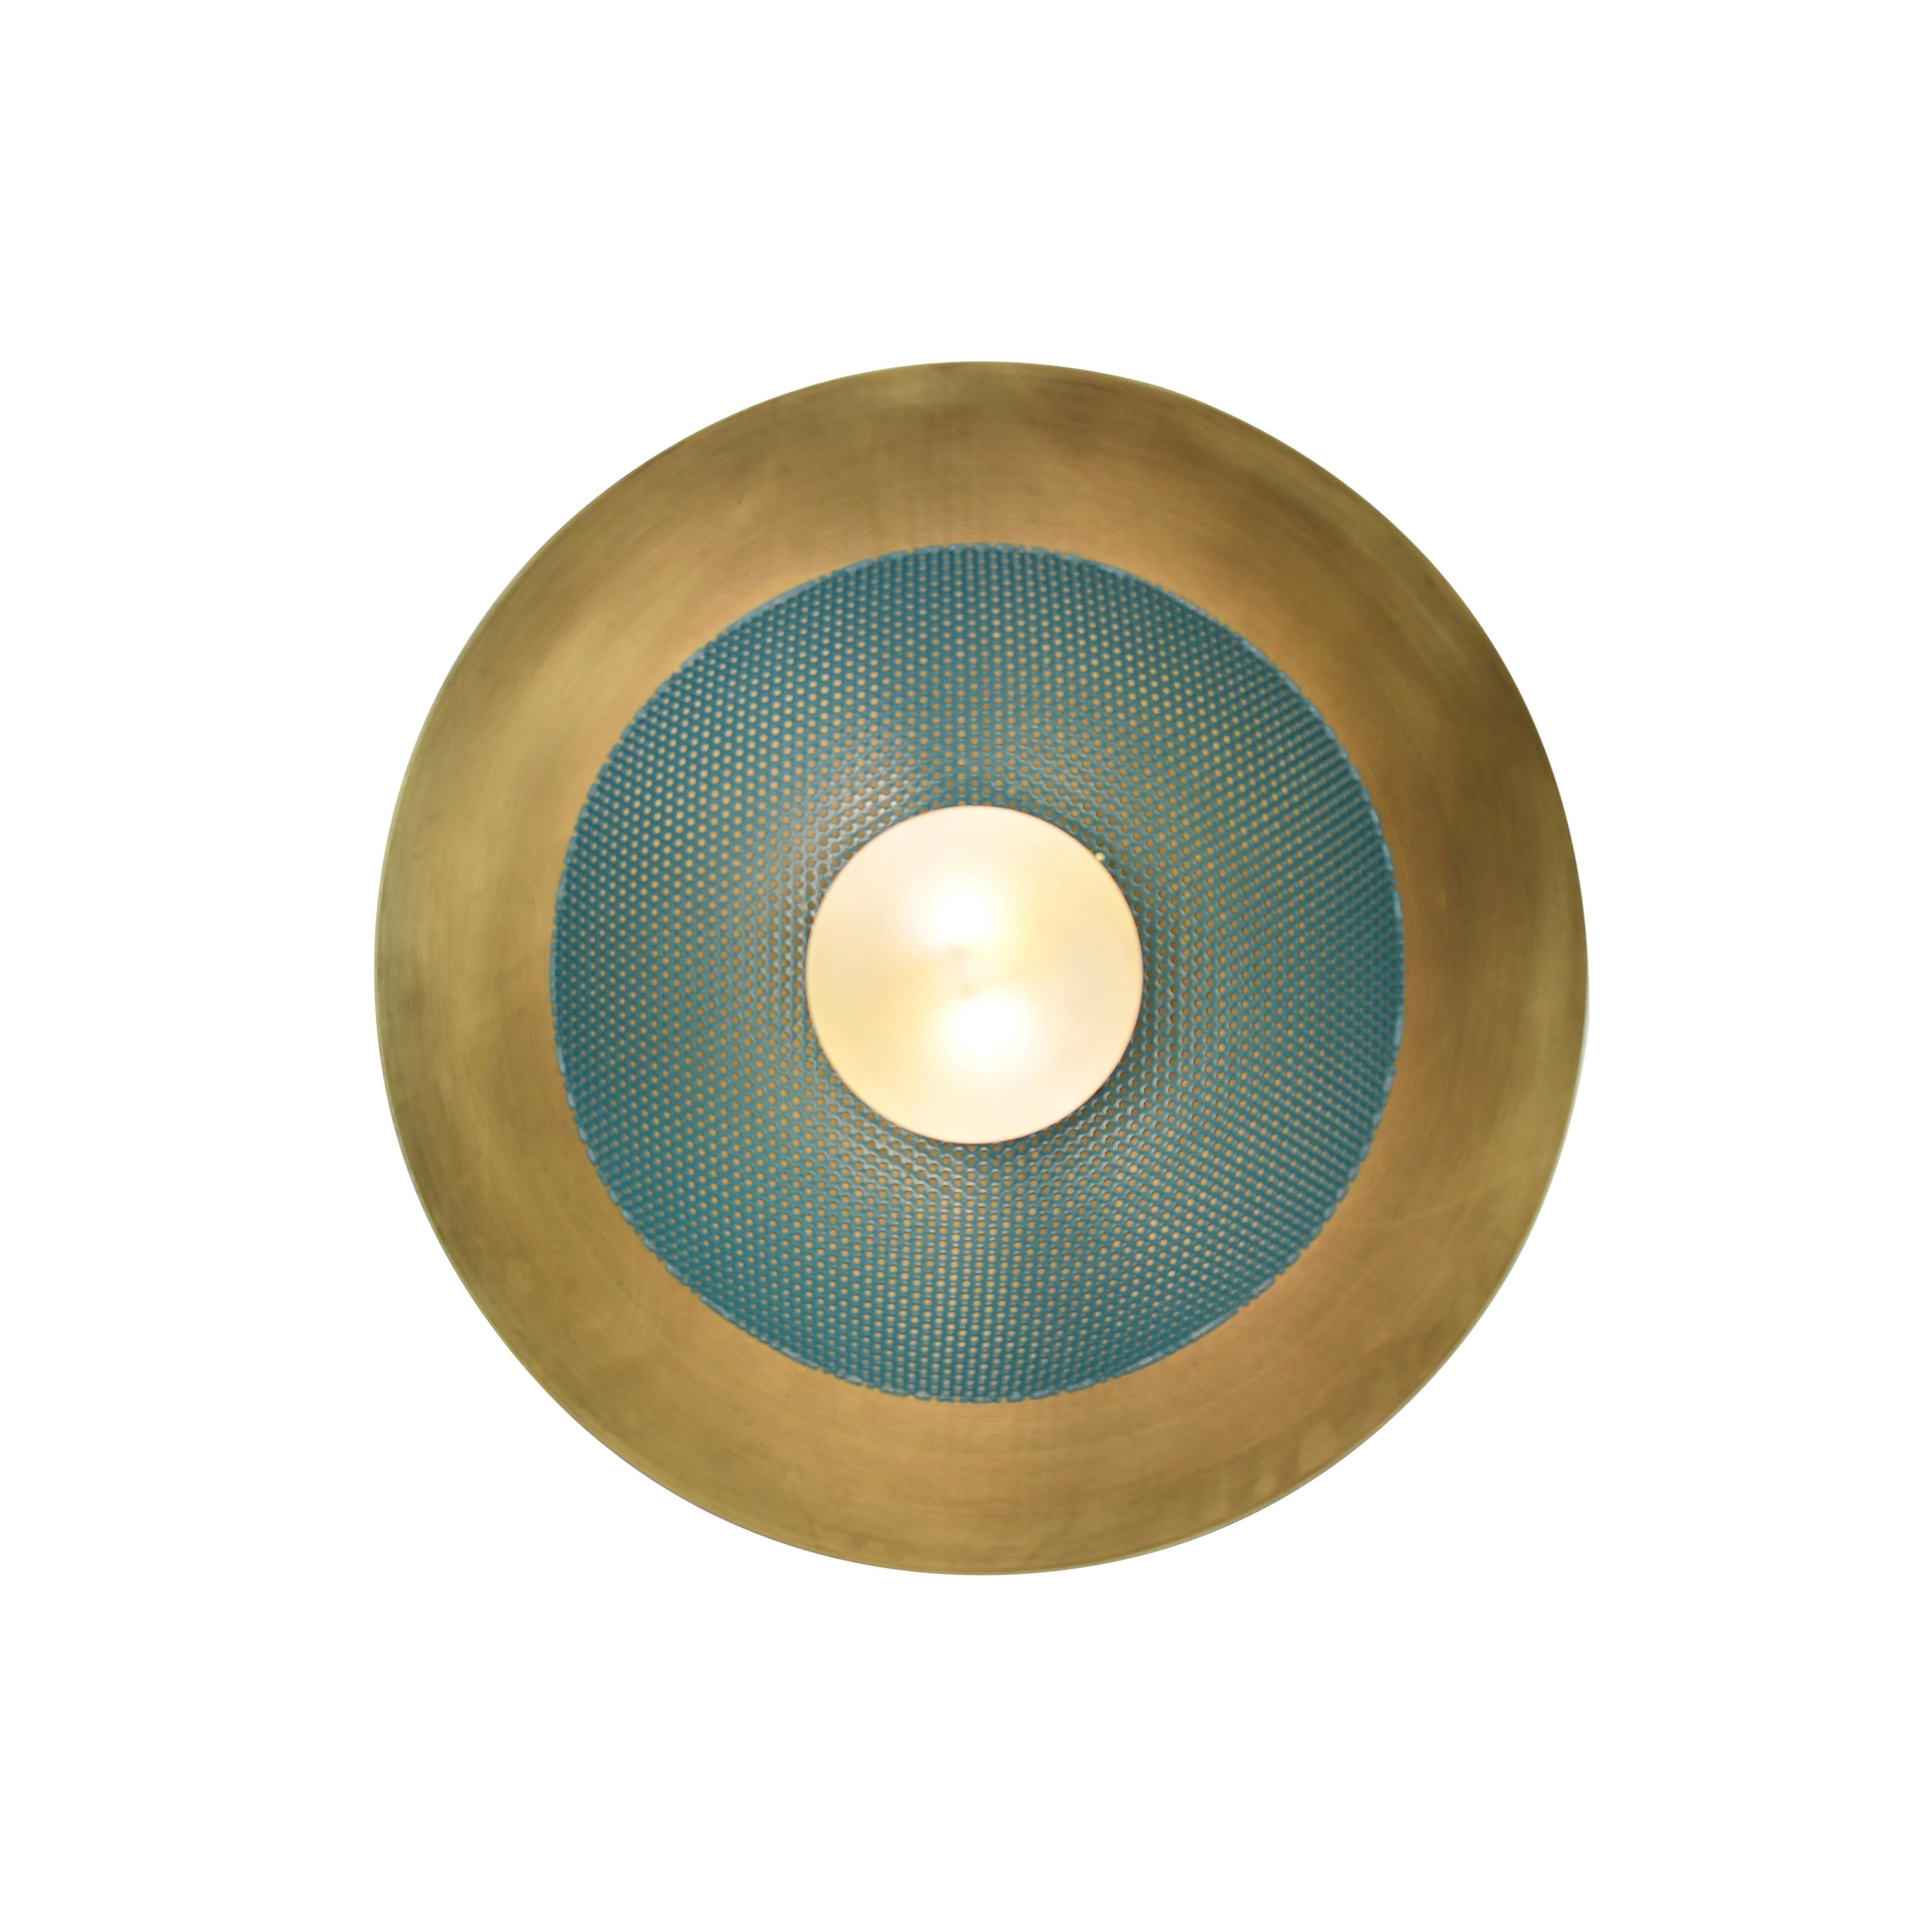 Centric Wall Sconce in Solid Brass and Teal Enamel Mesh Blueprint Lighting, 2019